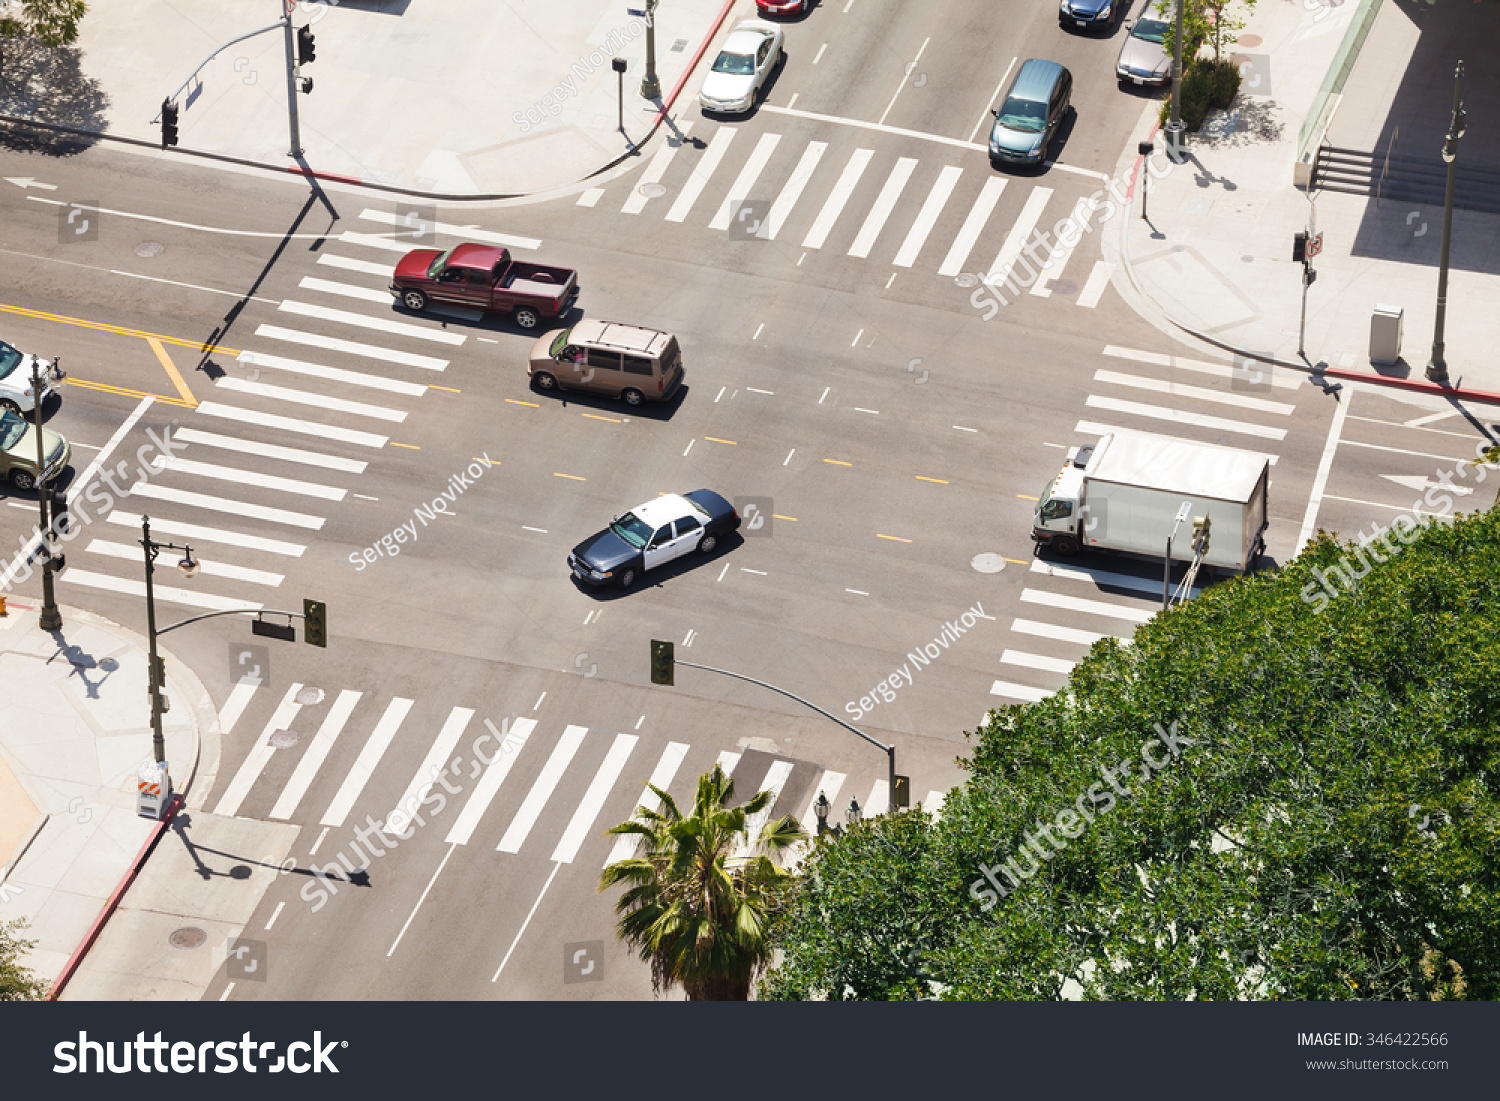 stock-photo-spring-street-and-traffic-in-los-angeles-usa-346422566.jpg